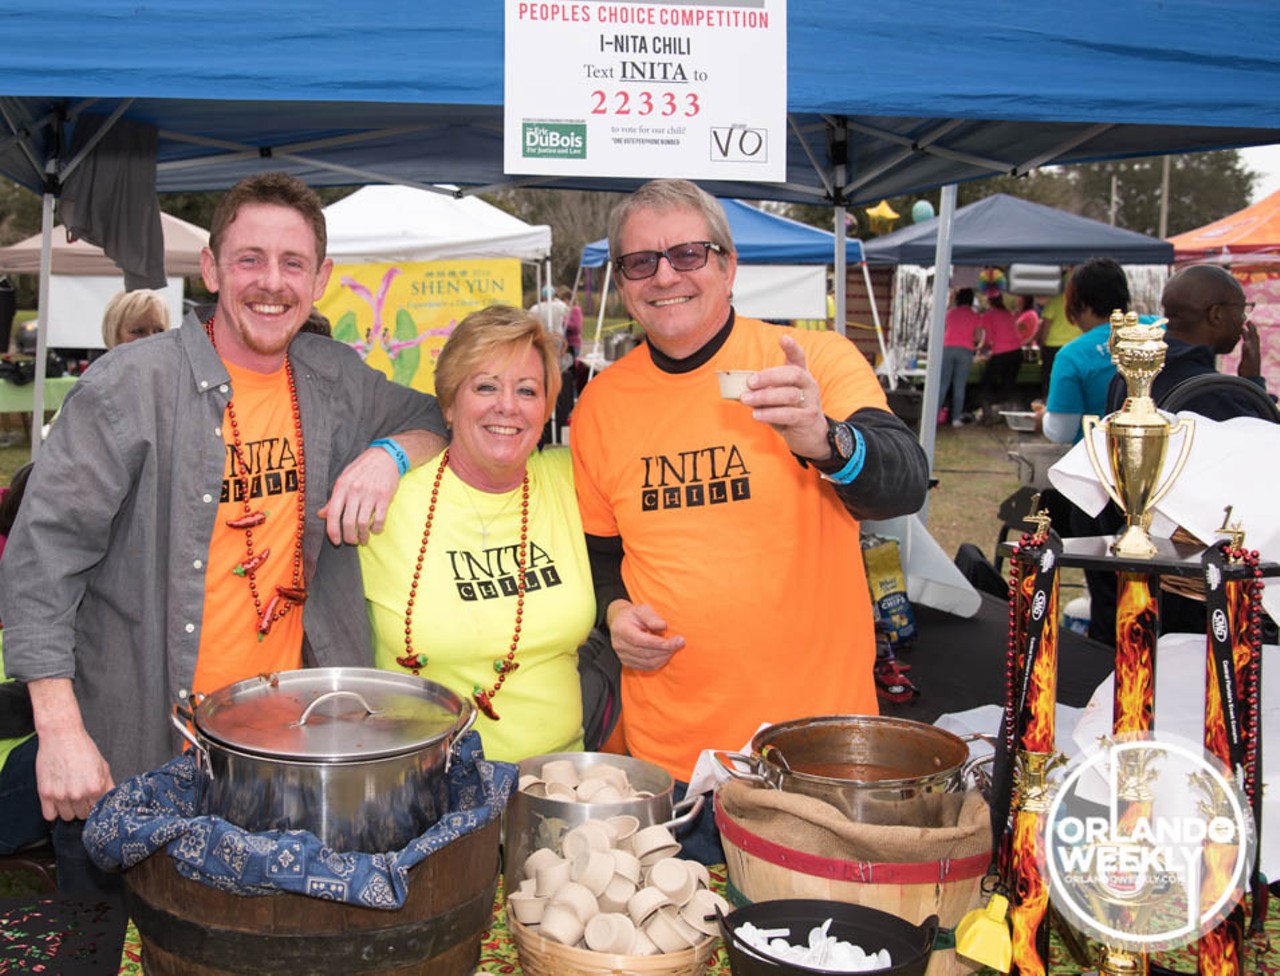 Photos of everyone who made the Northwestern Mutual Orlando Chili Cook-off a huge success